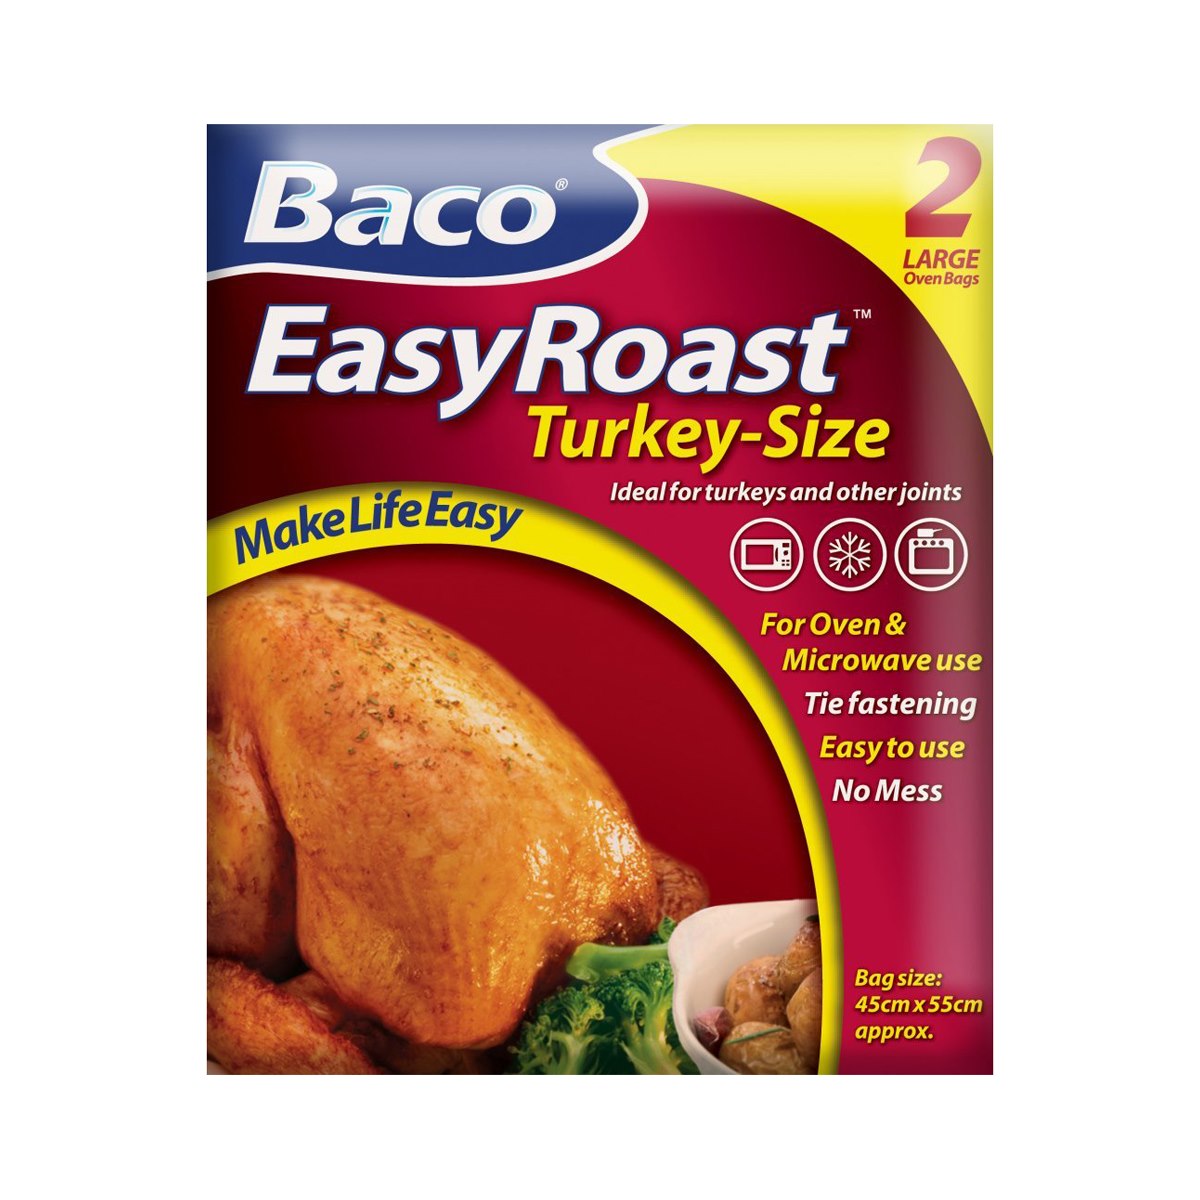 Bacofoil The Turkey Roasting Bags (2 Pack)